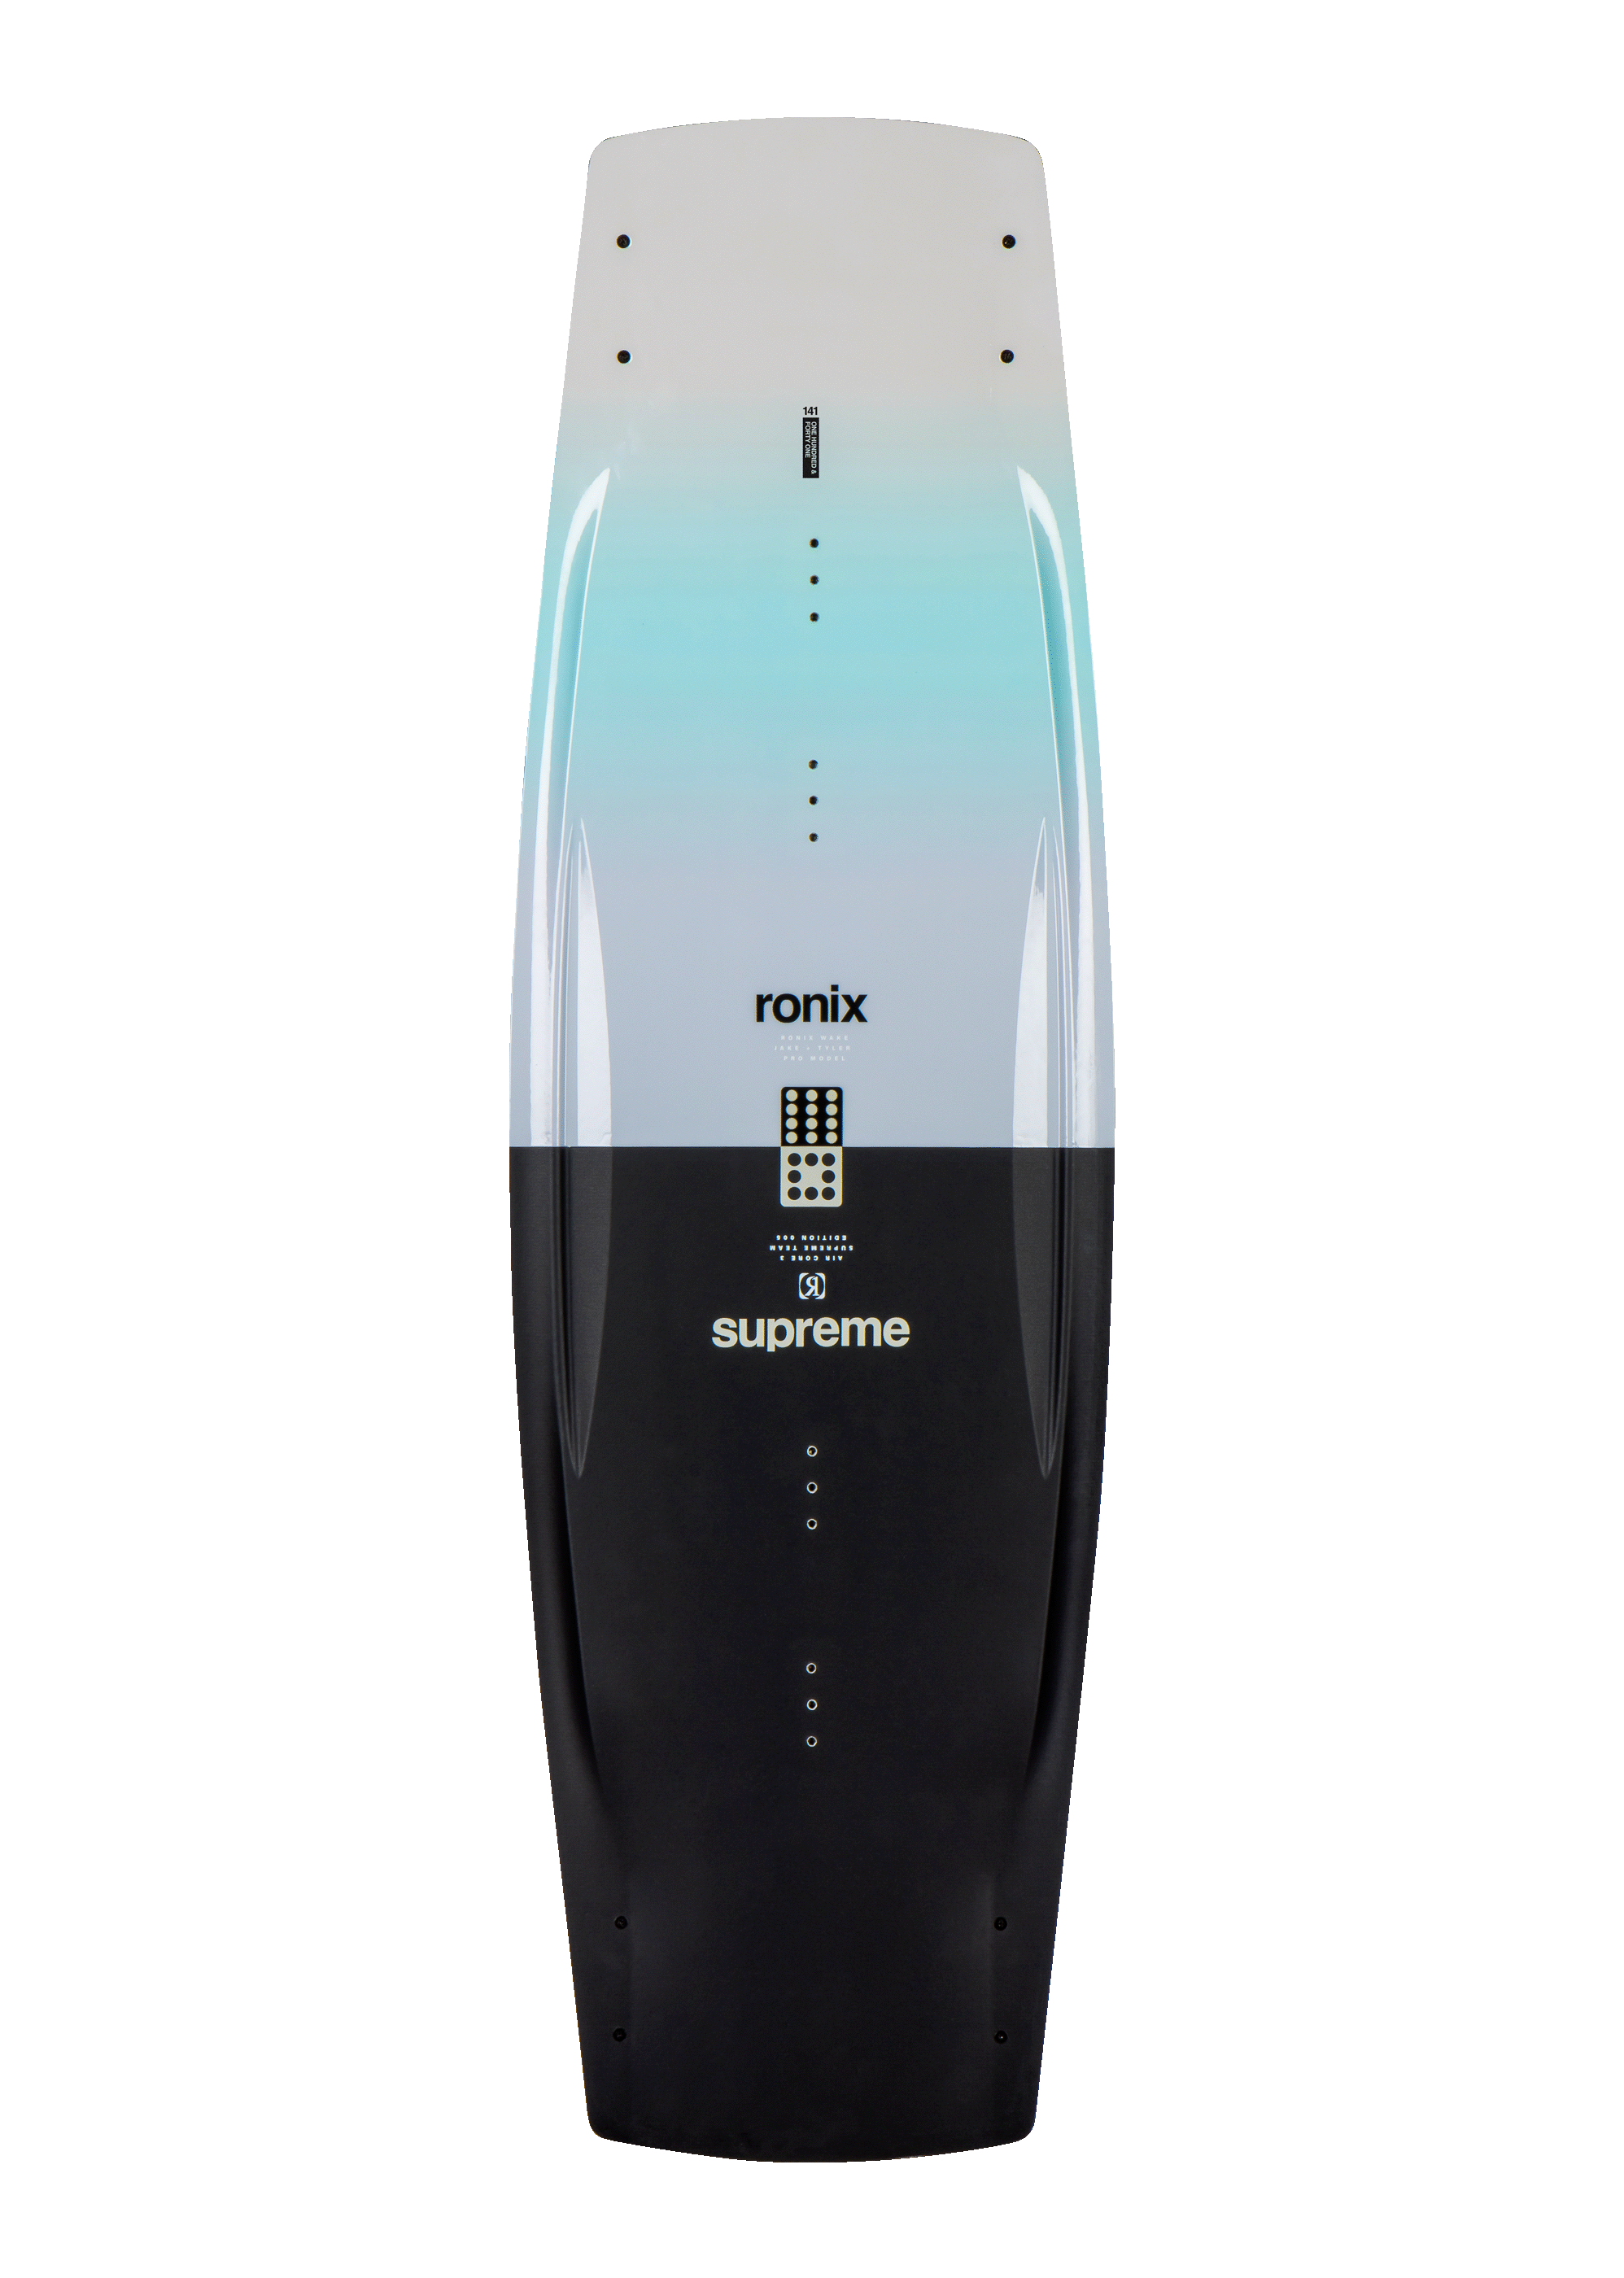 RONIX SUPREME WITH ANTHEM BOA PACKAGE